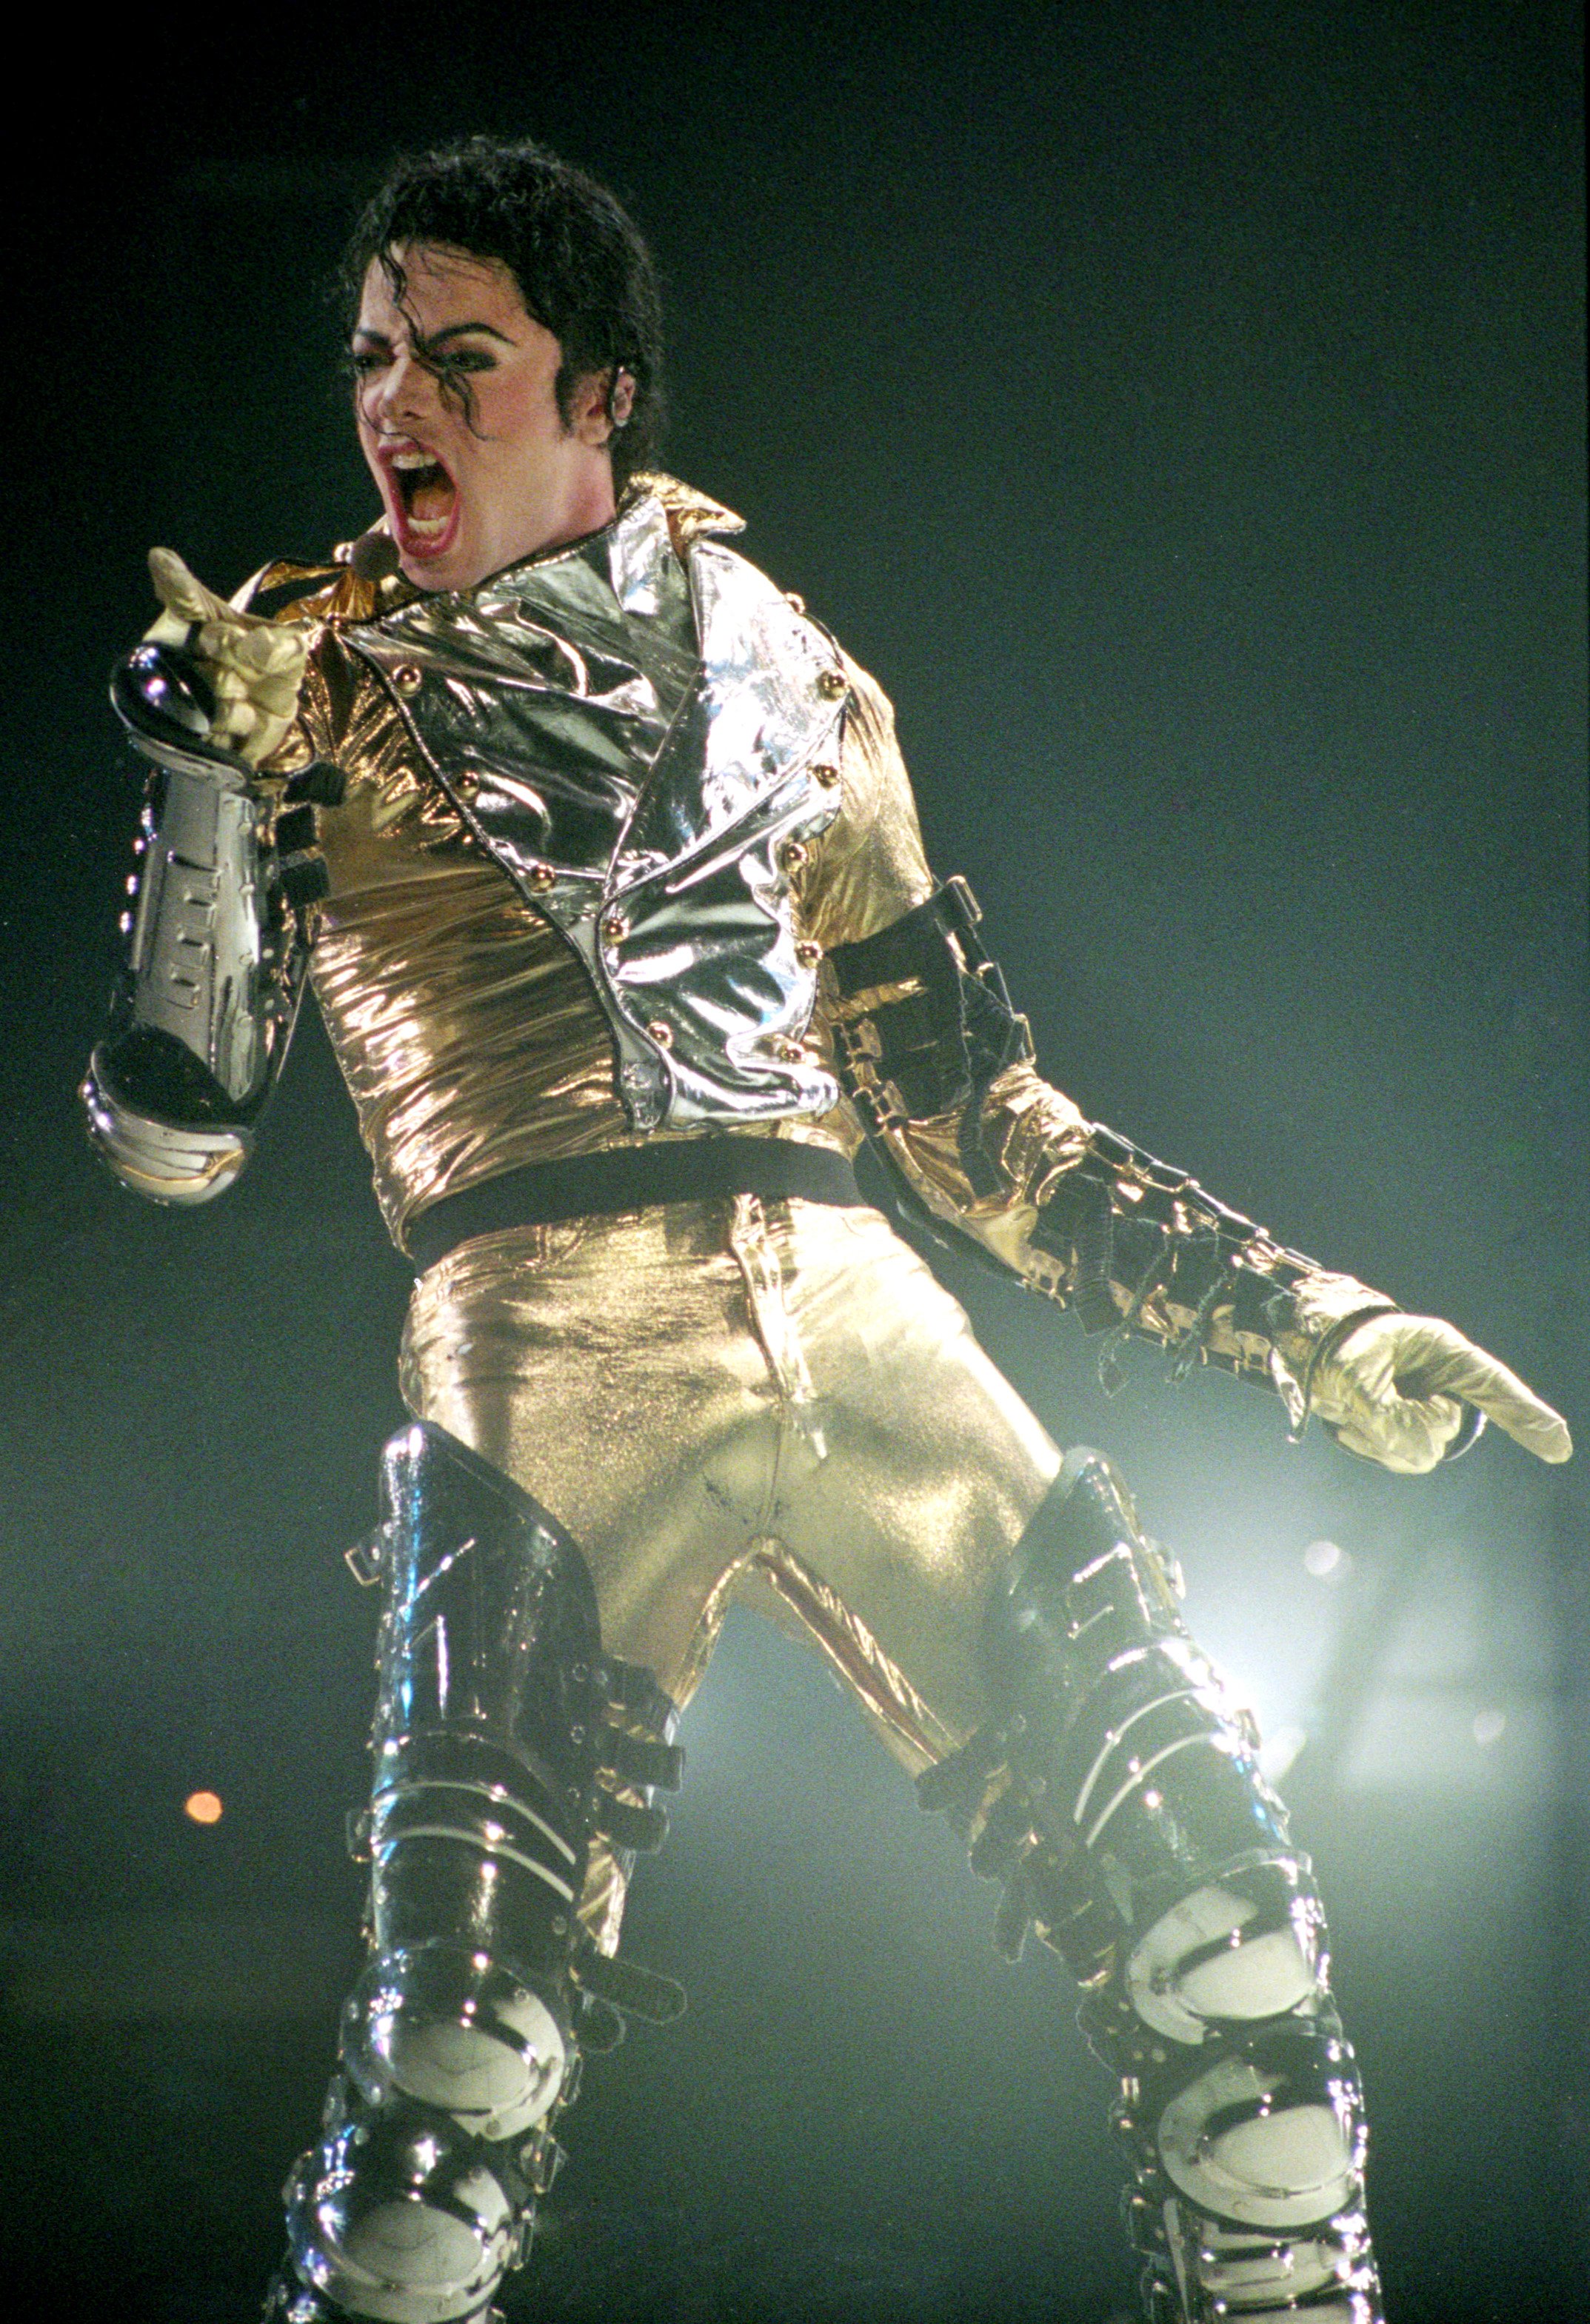 Michael Jackson performs on stage during the "HIStory" world tour concert on November 10, 1996. | Photo: Getty Images